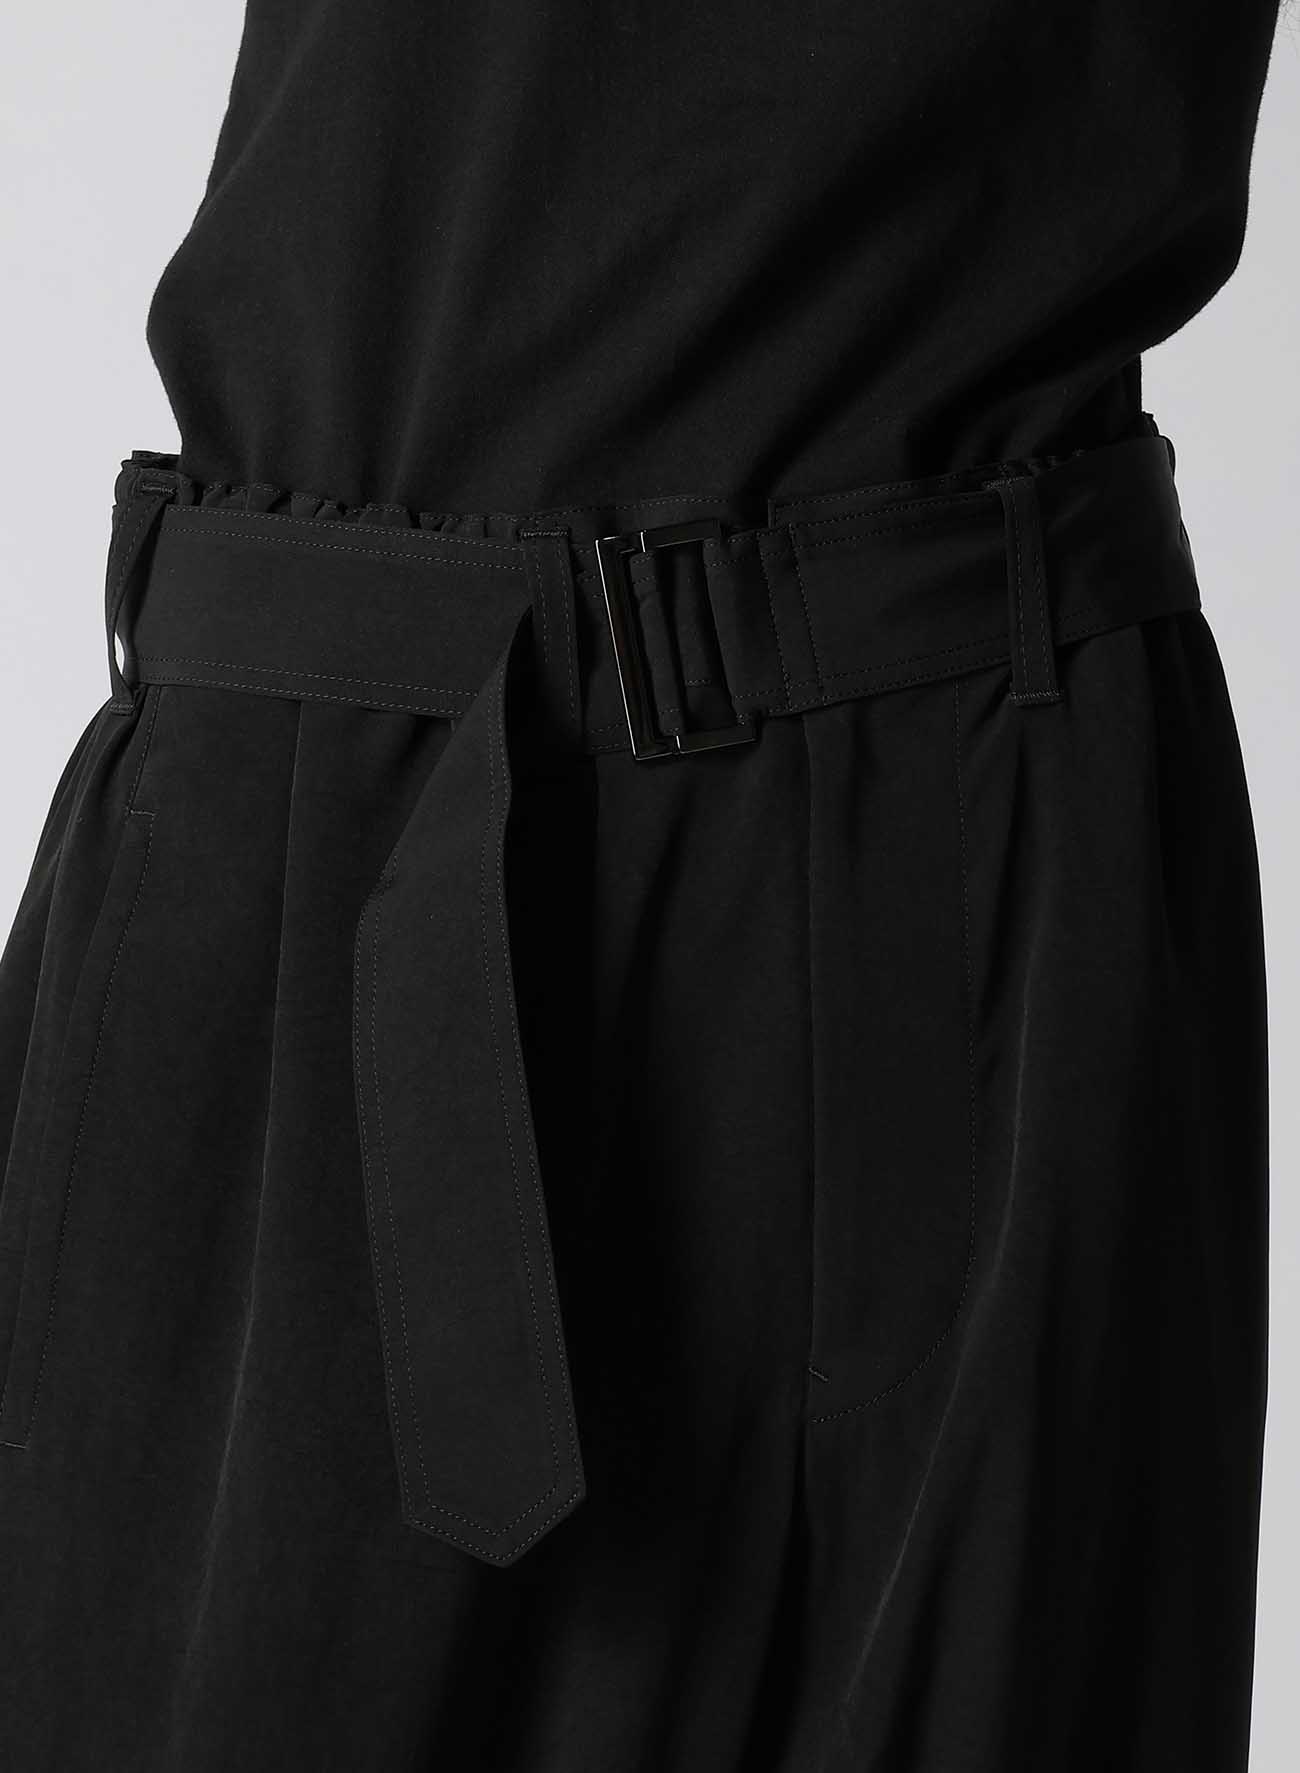 TRIACETATE/POLYESTER CREPE de CHINE EXTRA WIDE FRONT SEAM PANTS